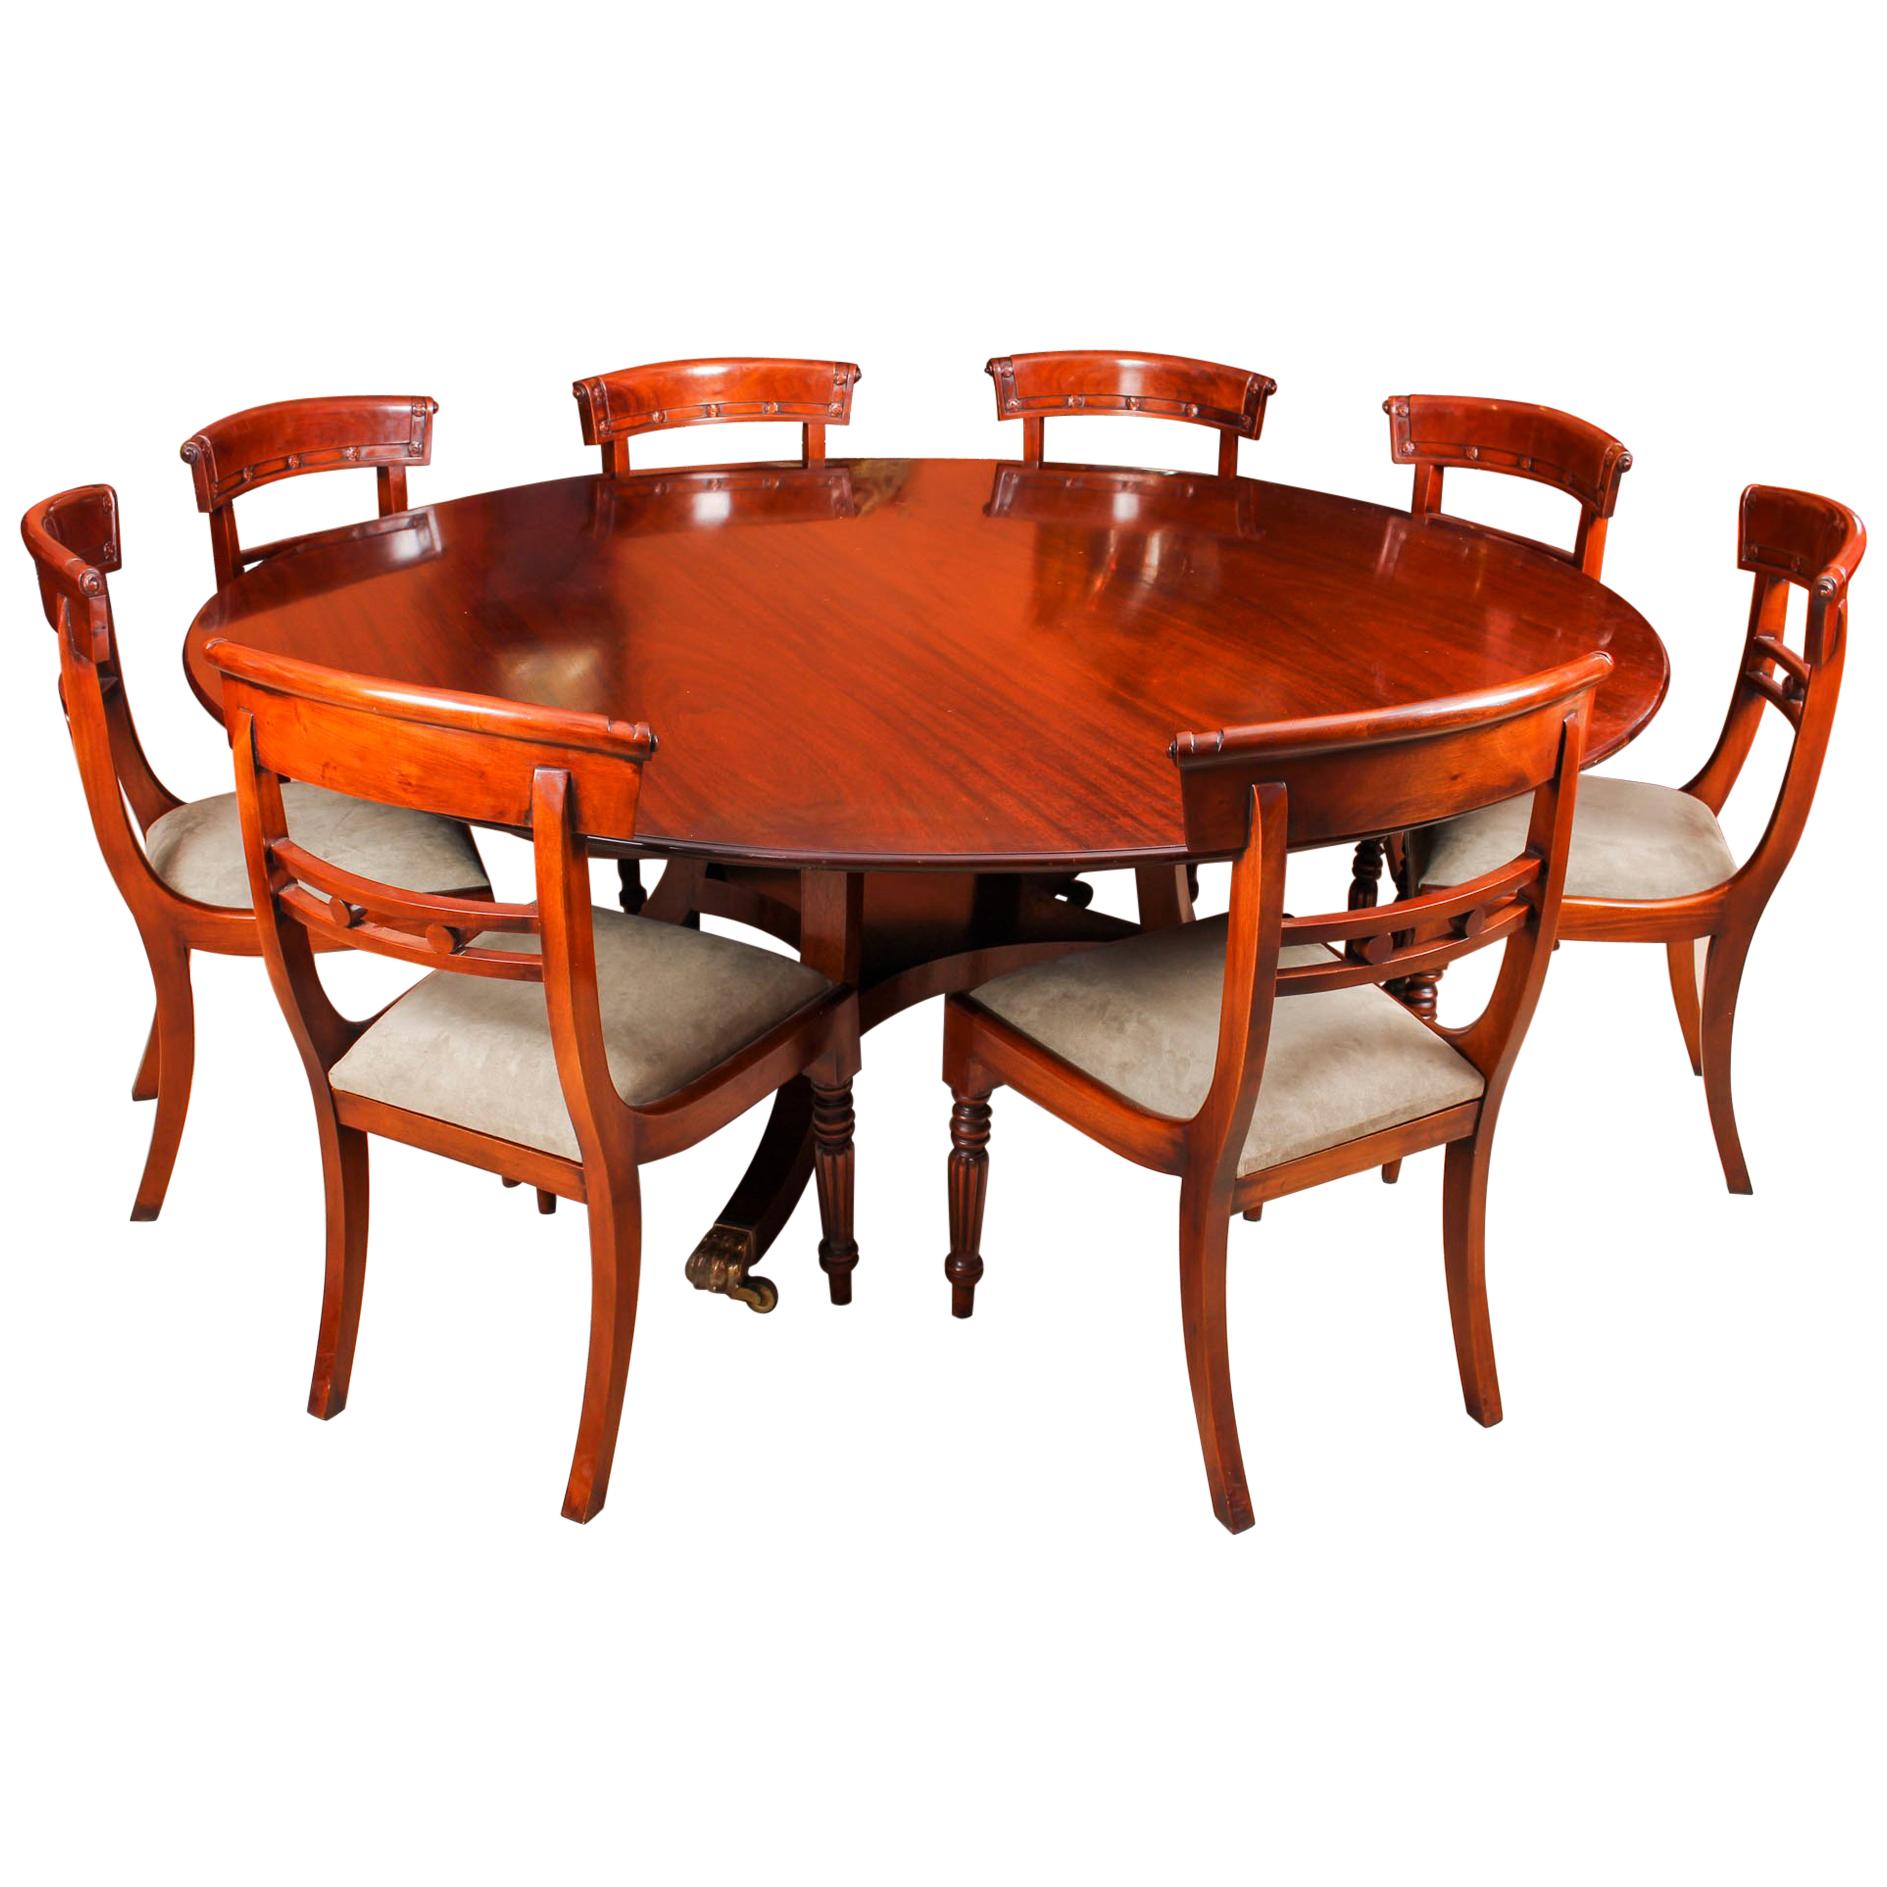 Vintage Round Table and 8 Chairs William Tillman, 20th Century